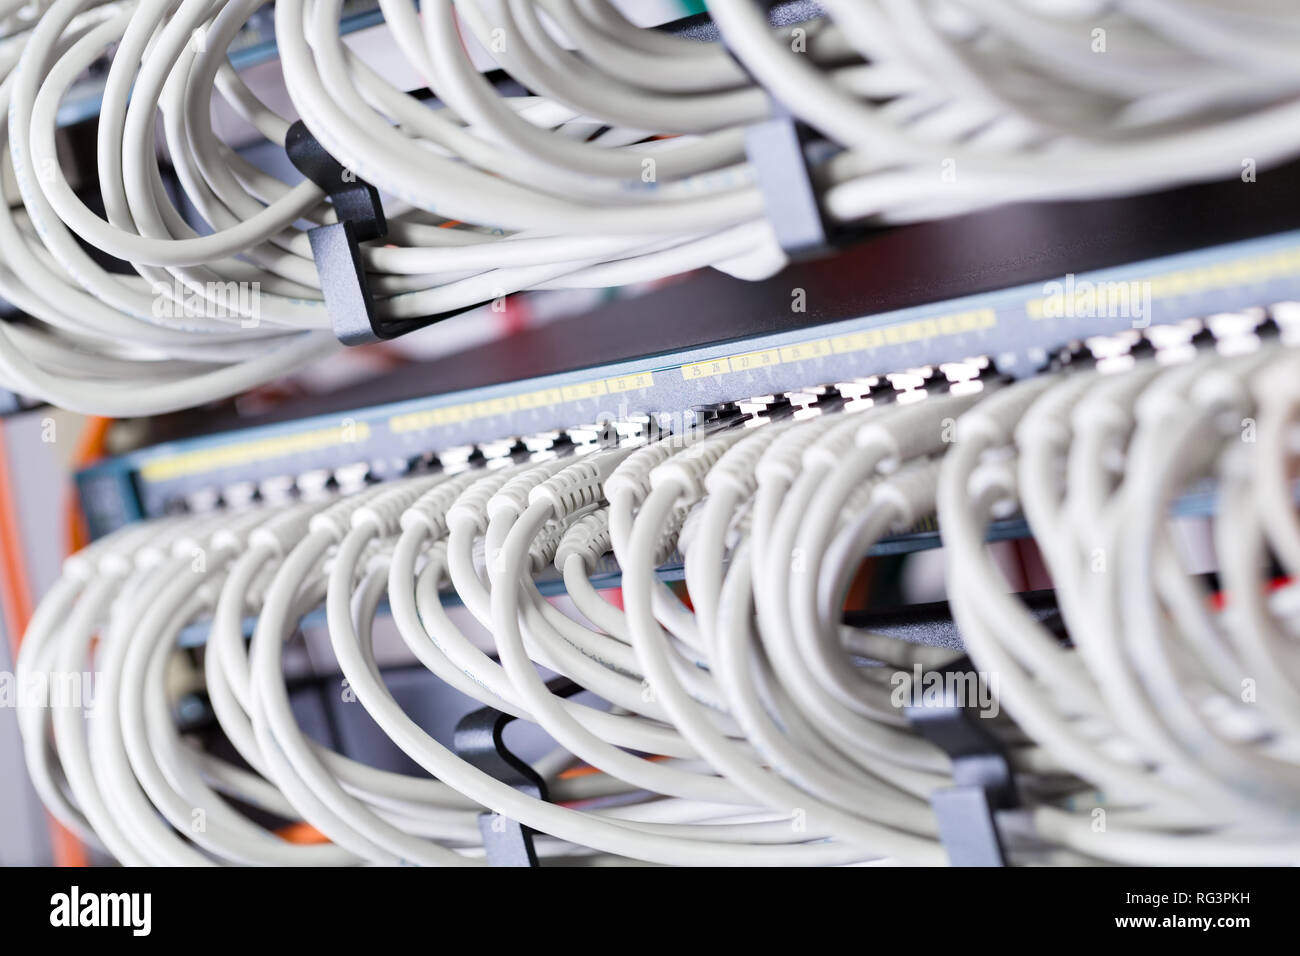 Gigabit network switch and perfect aligned patch cables in datacenter Stock Photo